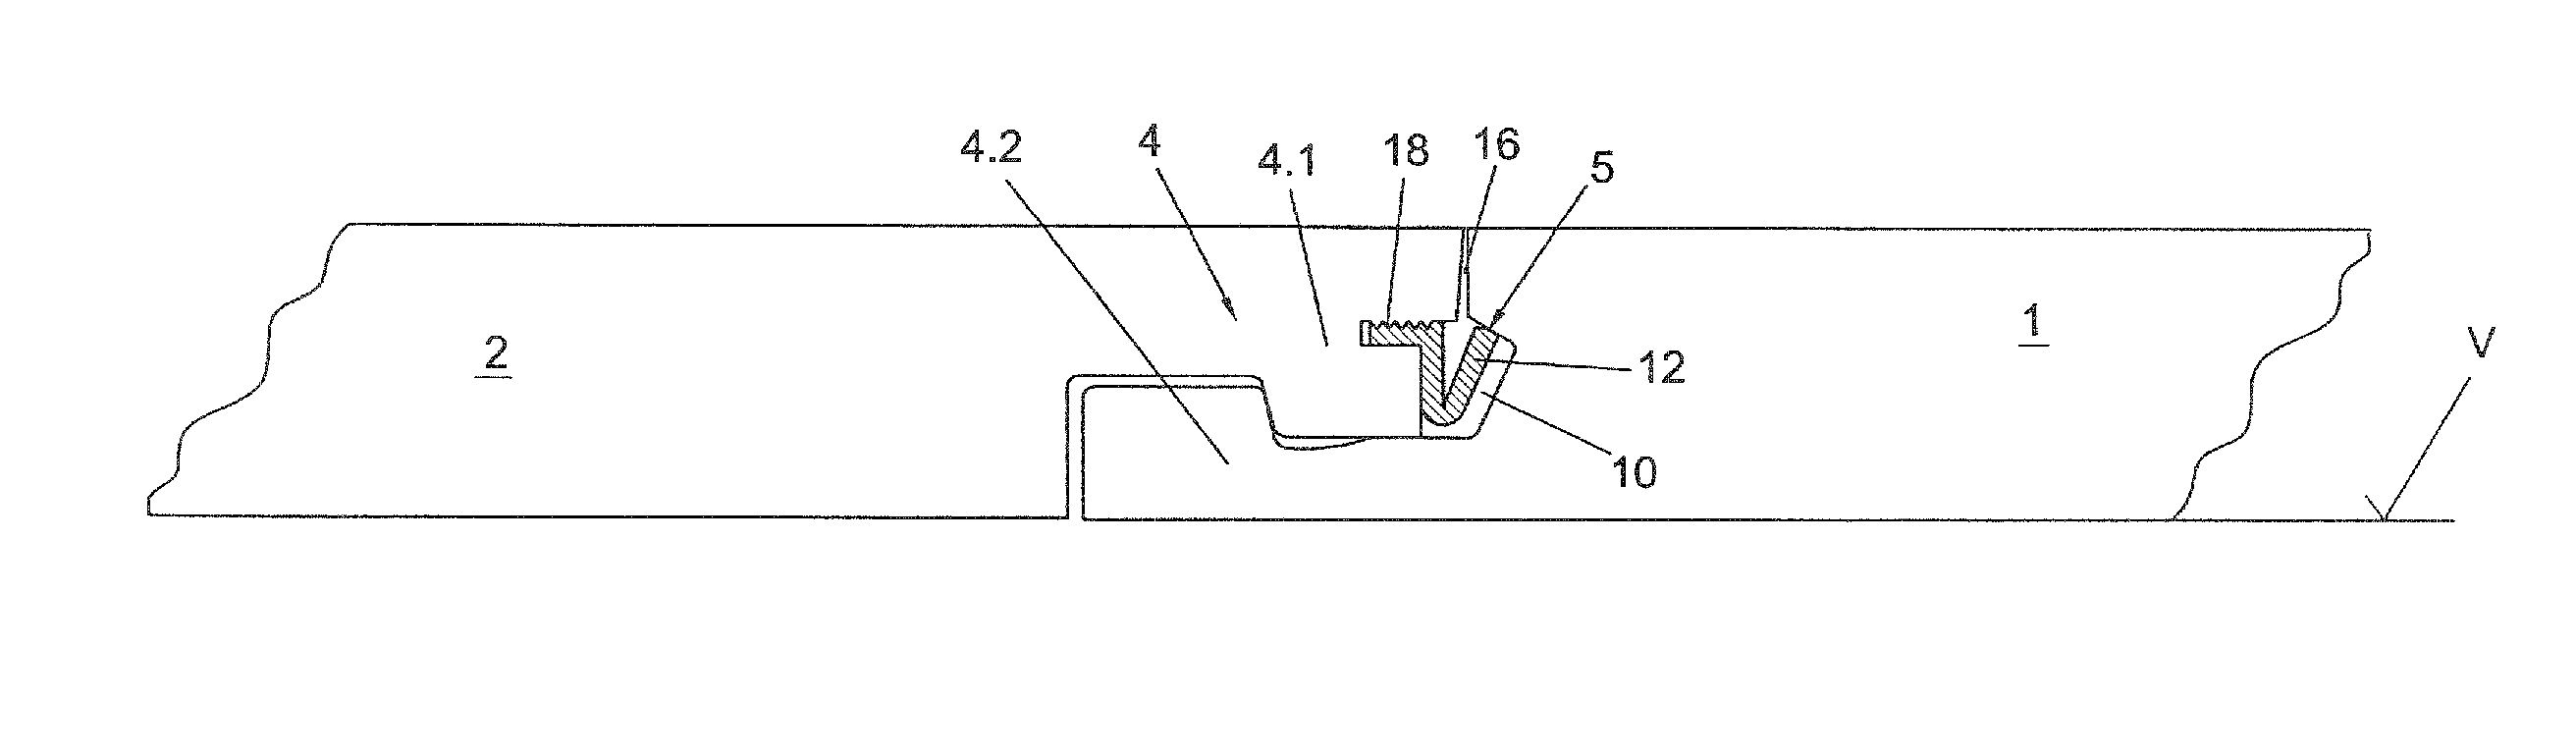 Apparatus for premounting of locking elements to a panel